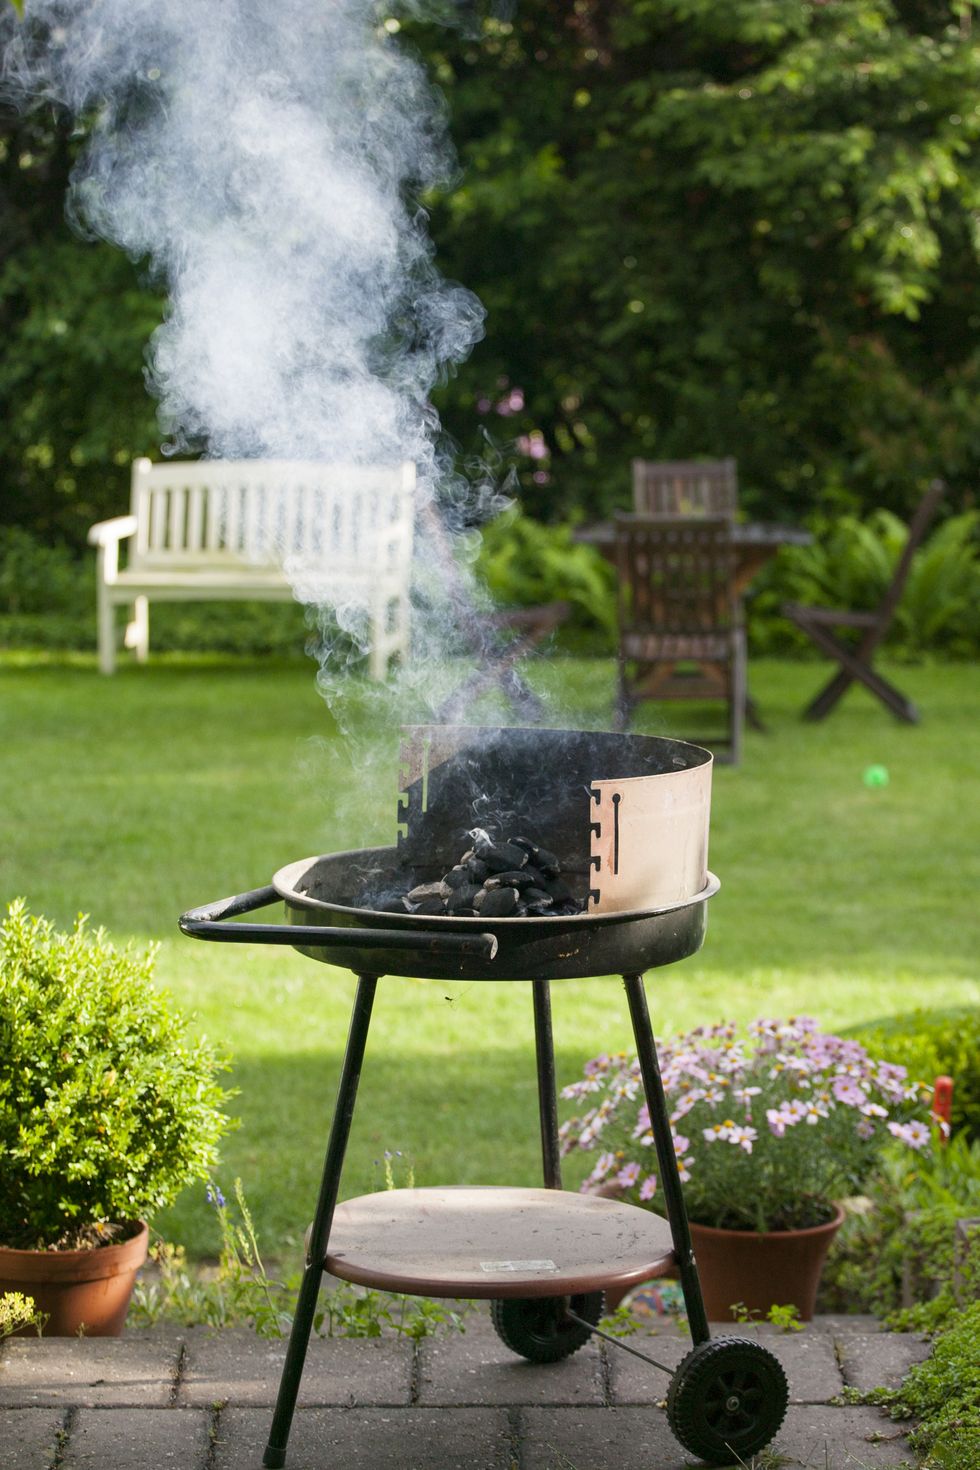 <p>The&nbsp;<a href="http://www.housebeautiful.co.uk/garden/a1779/how-to-create-perfect-bbq-garden-setting/" data-tracking-id="recirc-text-link">barbecue</a> was fun while it lasted, but lingering food on the grates will draw bugs long after the party's over, according to Bell. Another common BBQ&nbsp;mistake:&nbsp;Emptying leftover drinks&nbsp;on the grass. The sugar&nbsp;attracts ants like none other, Webb warns.</p><p><strong data-redactor-tag="strong" data-verified="redactor">MORE:&nbsp;</strong><strong data-redactor-tag="strong" data-verified="redactor"><a href="http://www.housebeautiful.co.uk/garden/tips/a768/bbq-top-tips/"></a><em data-redactor-tag="em" data-verified="redactor"><a href="http://www.housebeautiful.co.uk/garden/tips/a768/bbq-top-tips/" data-tracking-id="recirc-text-link">5 barbecue cooking tips</a></em></strong></p>